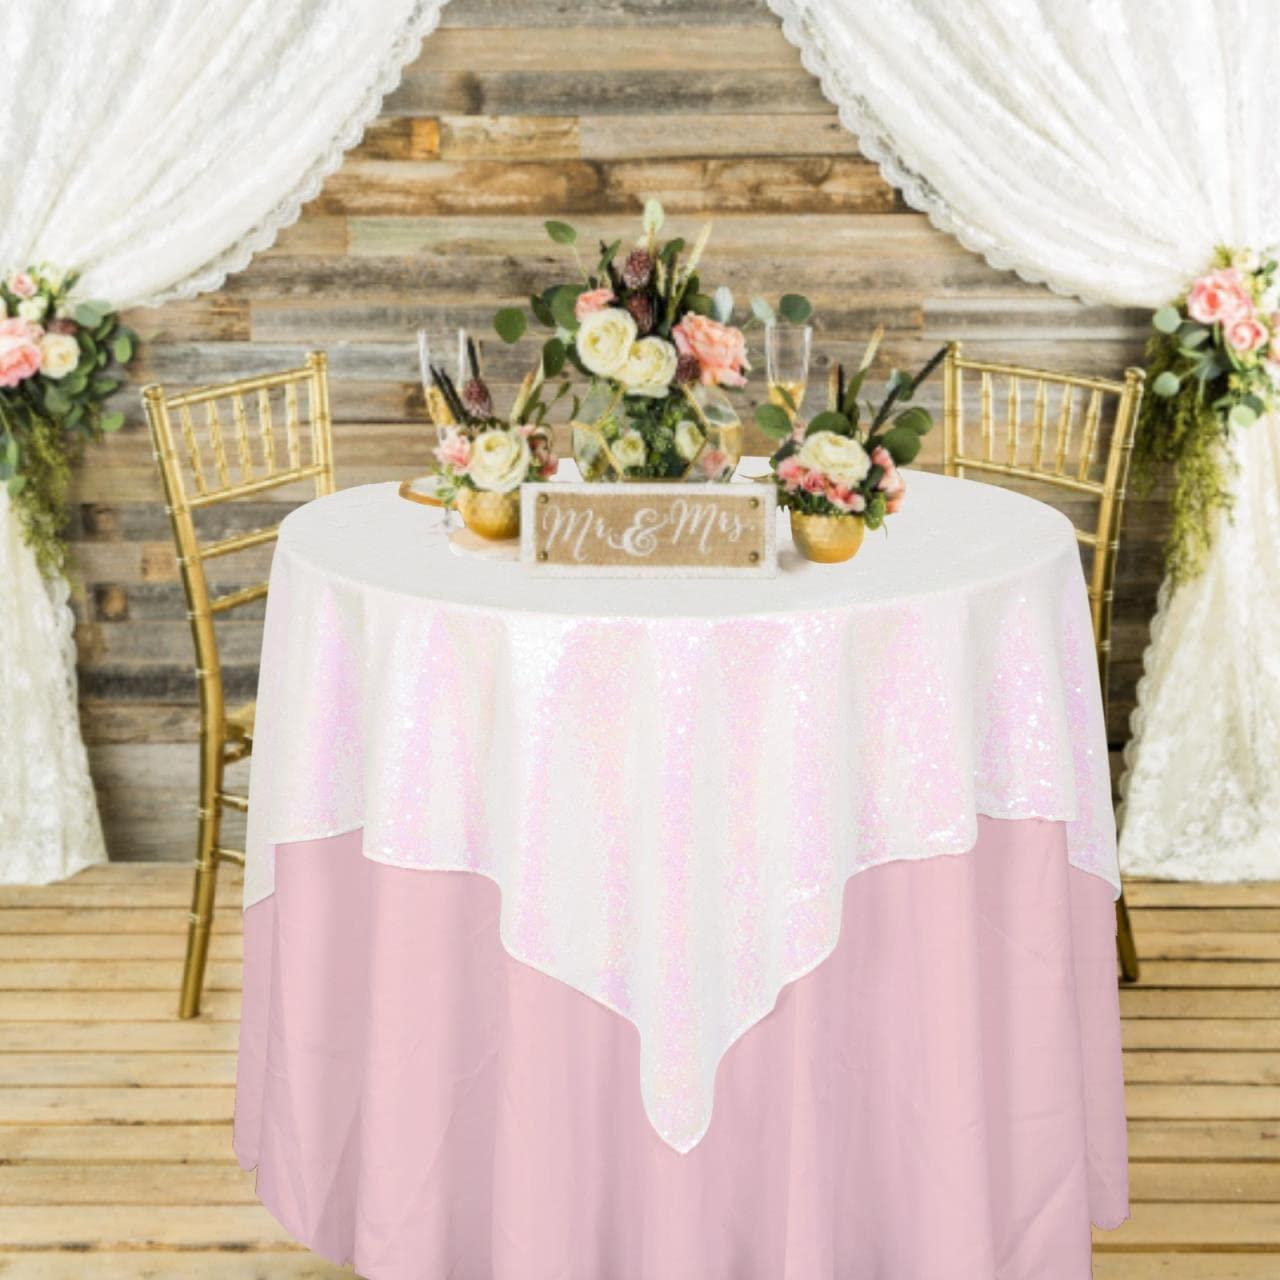 Tablecloth-Gold Sequin Table Overlay and Sequin Tablecloth/Linen for Wedding/Party/Event - If you say i do